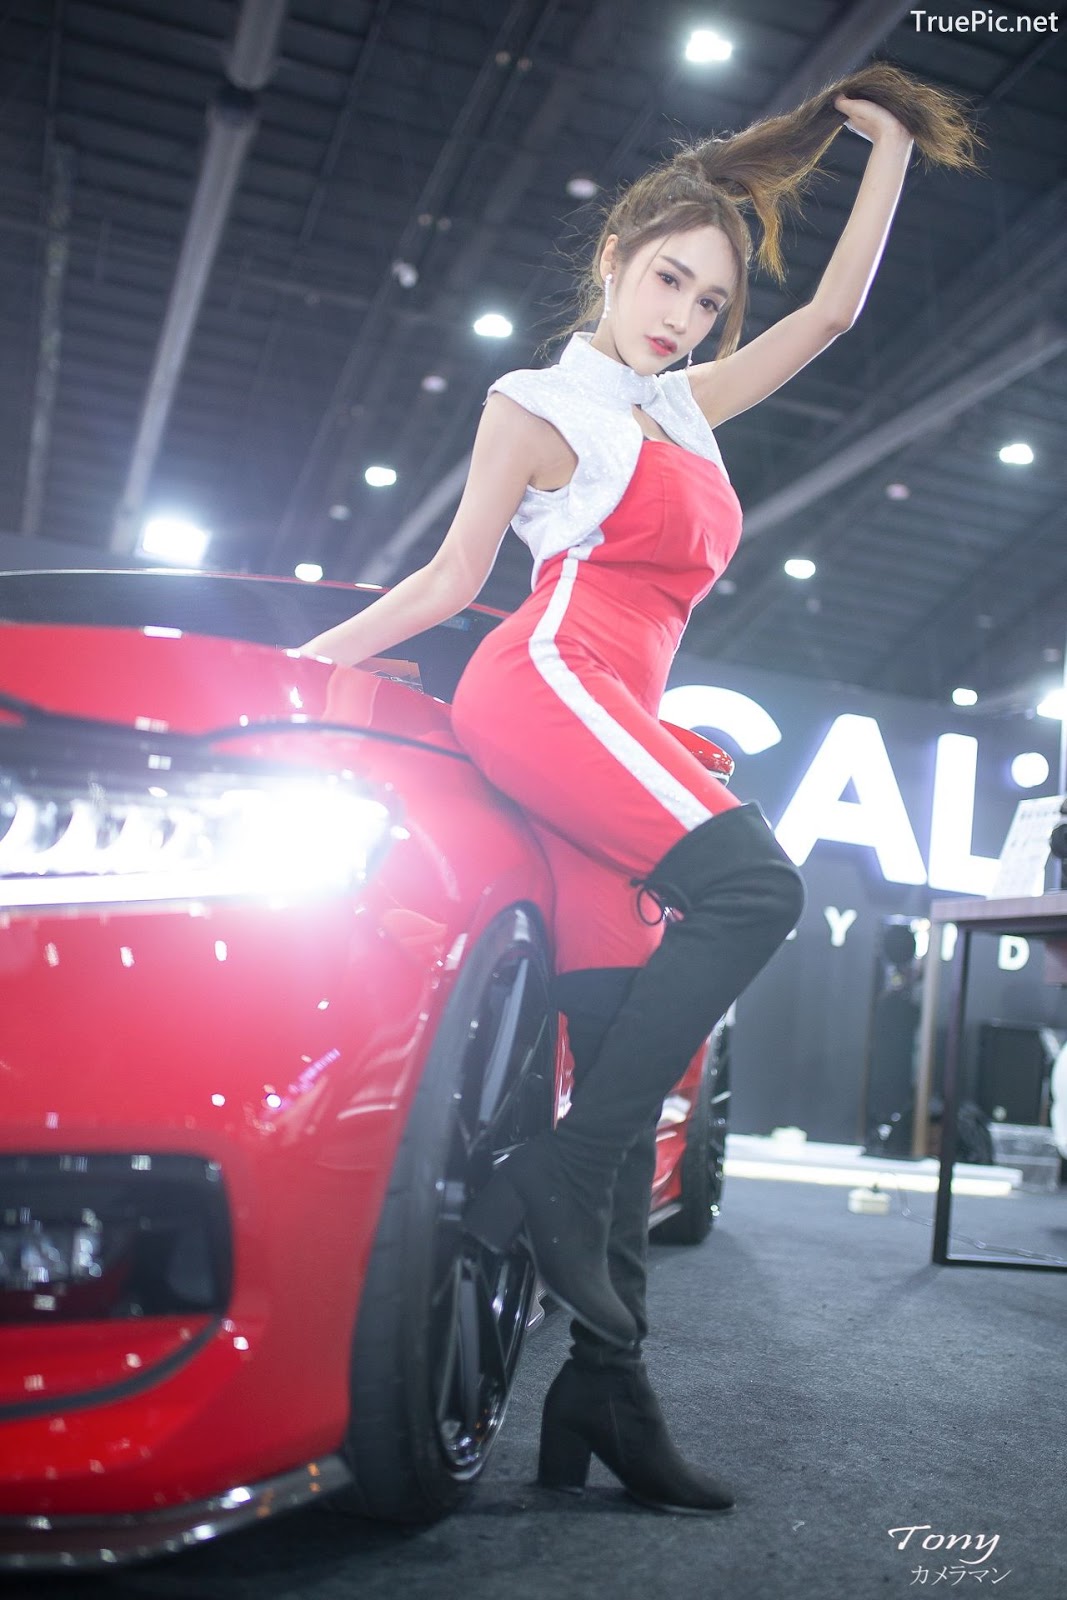 Image-Thailand-Hot-Model-Thai-Racing-Girl-At-Motor-Expo-2019-TruePic.net- Picture-53